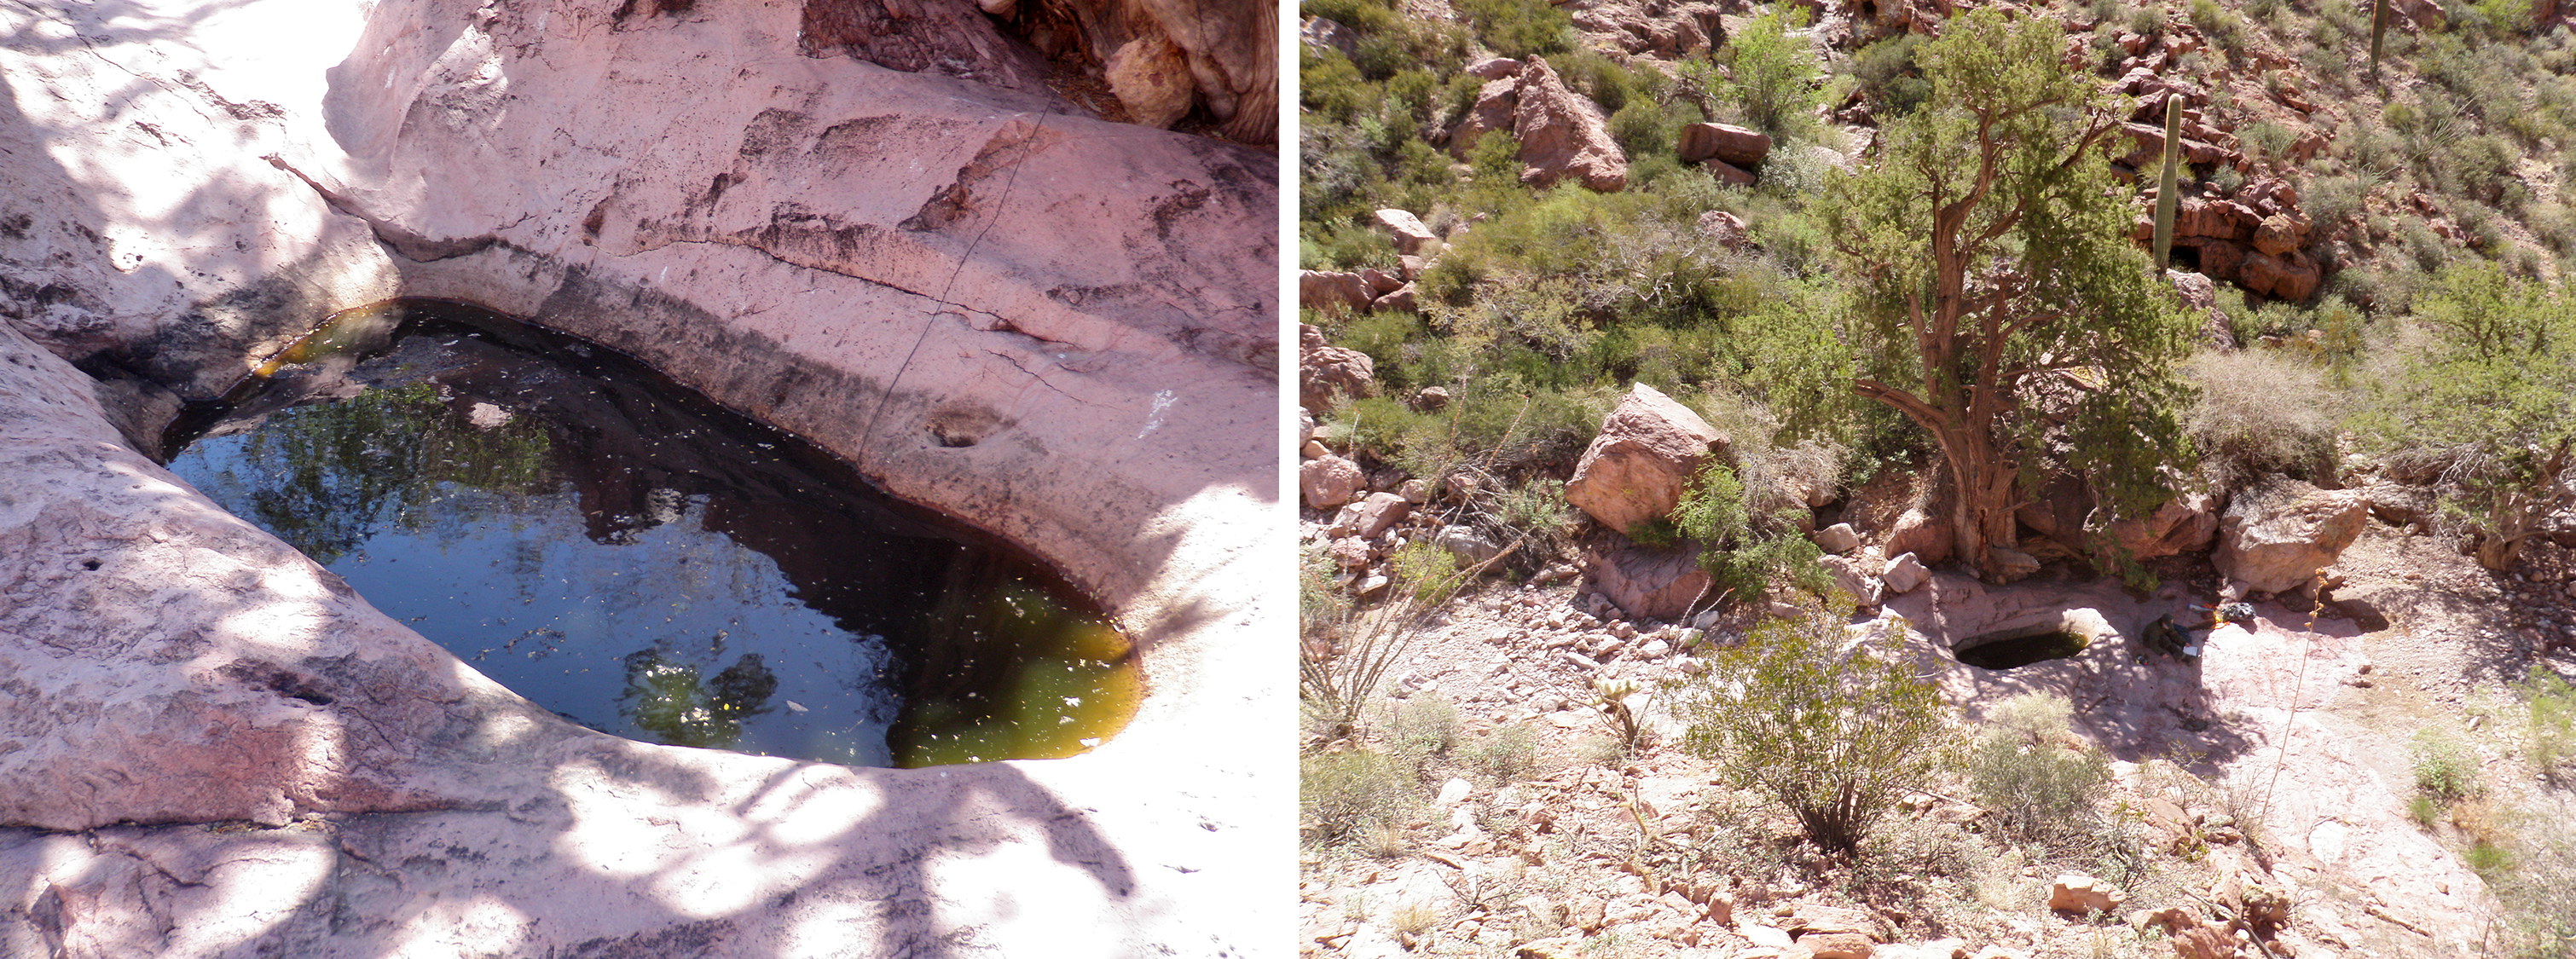 Two photos. At left, an opaque green pool in pink bedrock. At right, a view of the area from above. A tall deciduous tree grows next to the pool in a rocky desert landscape.